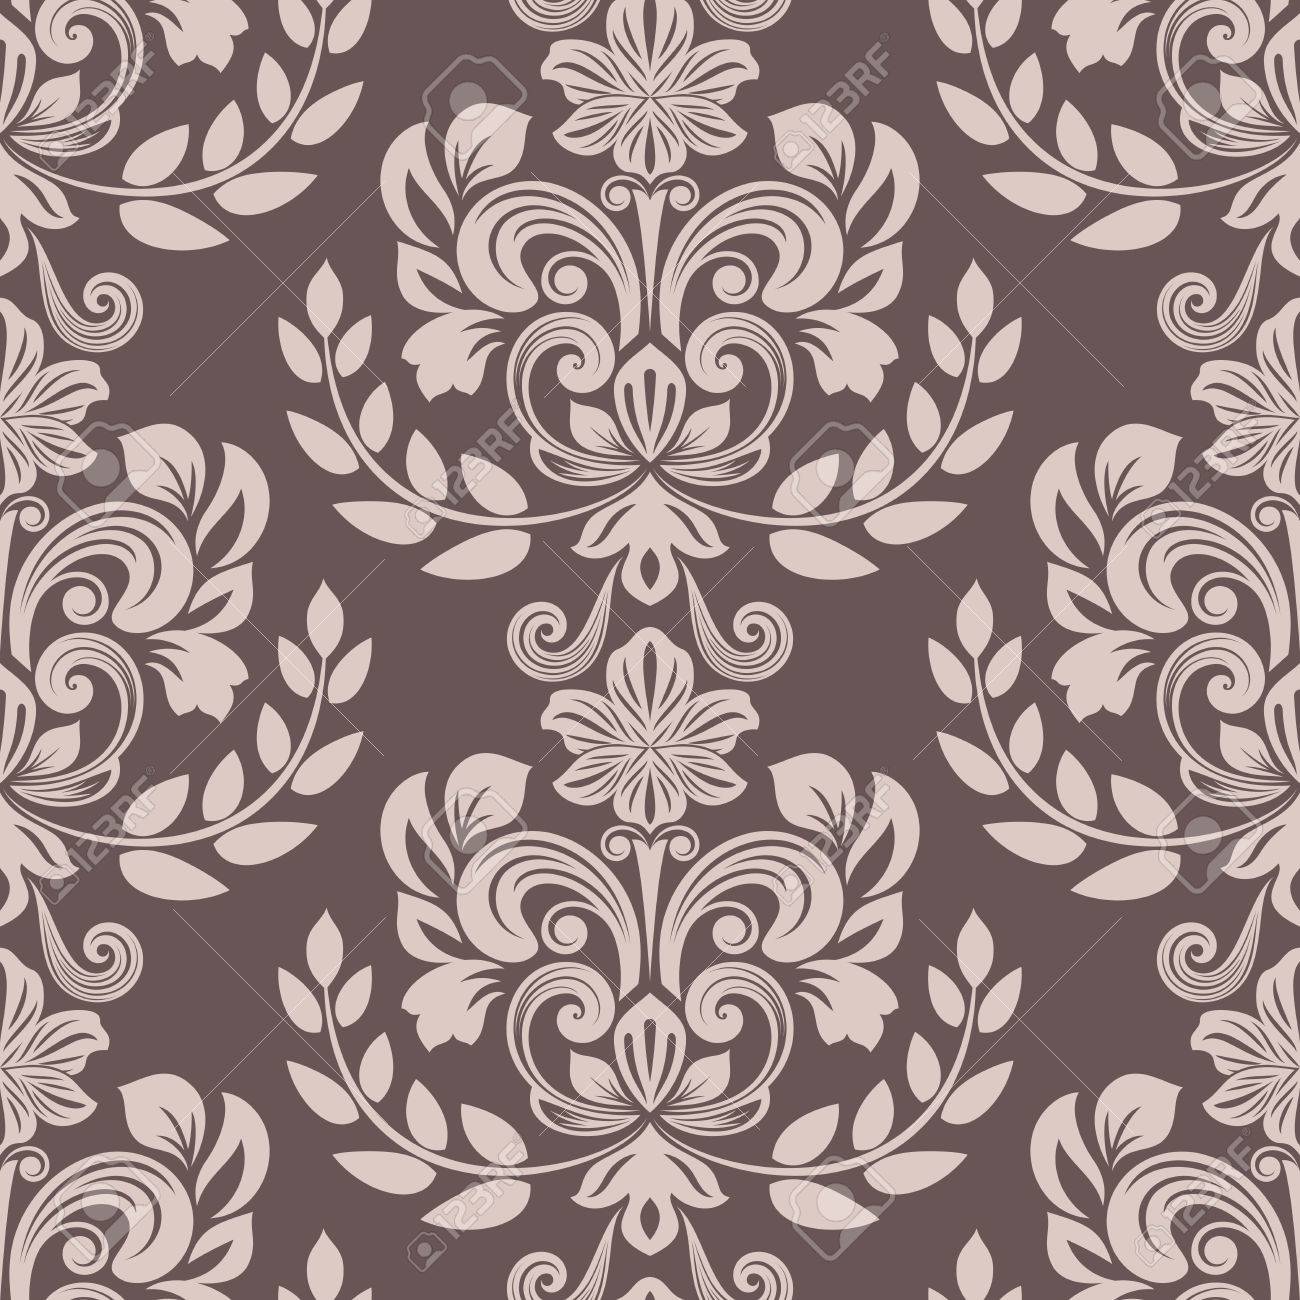 Free download Seamless Brown And Beige Floral Wallpaper Vector ...